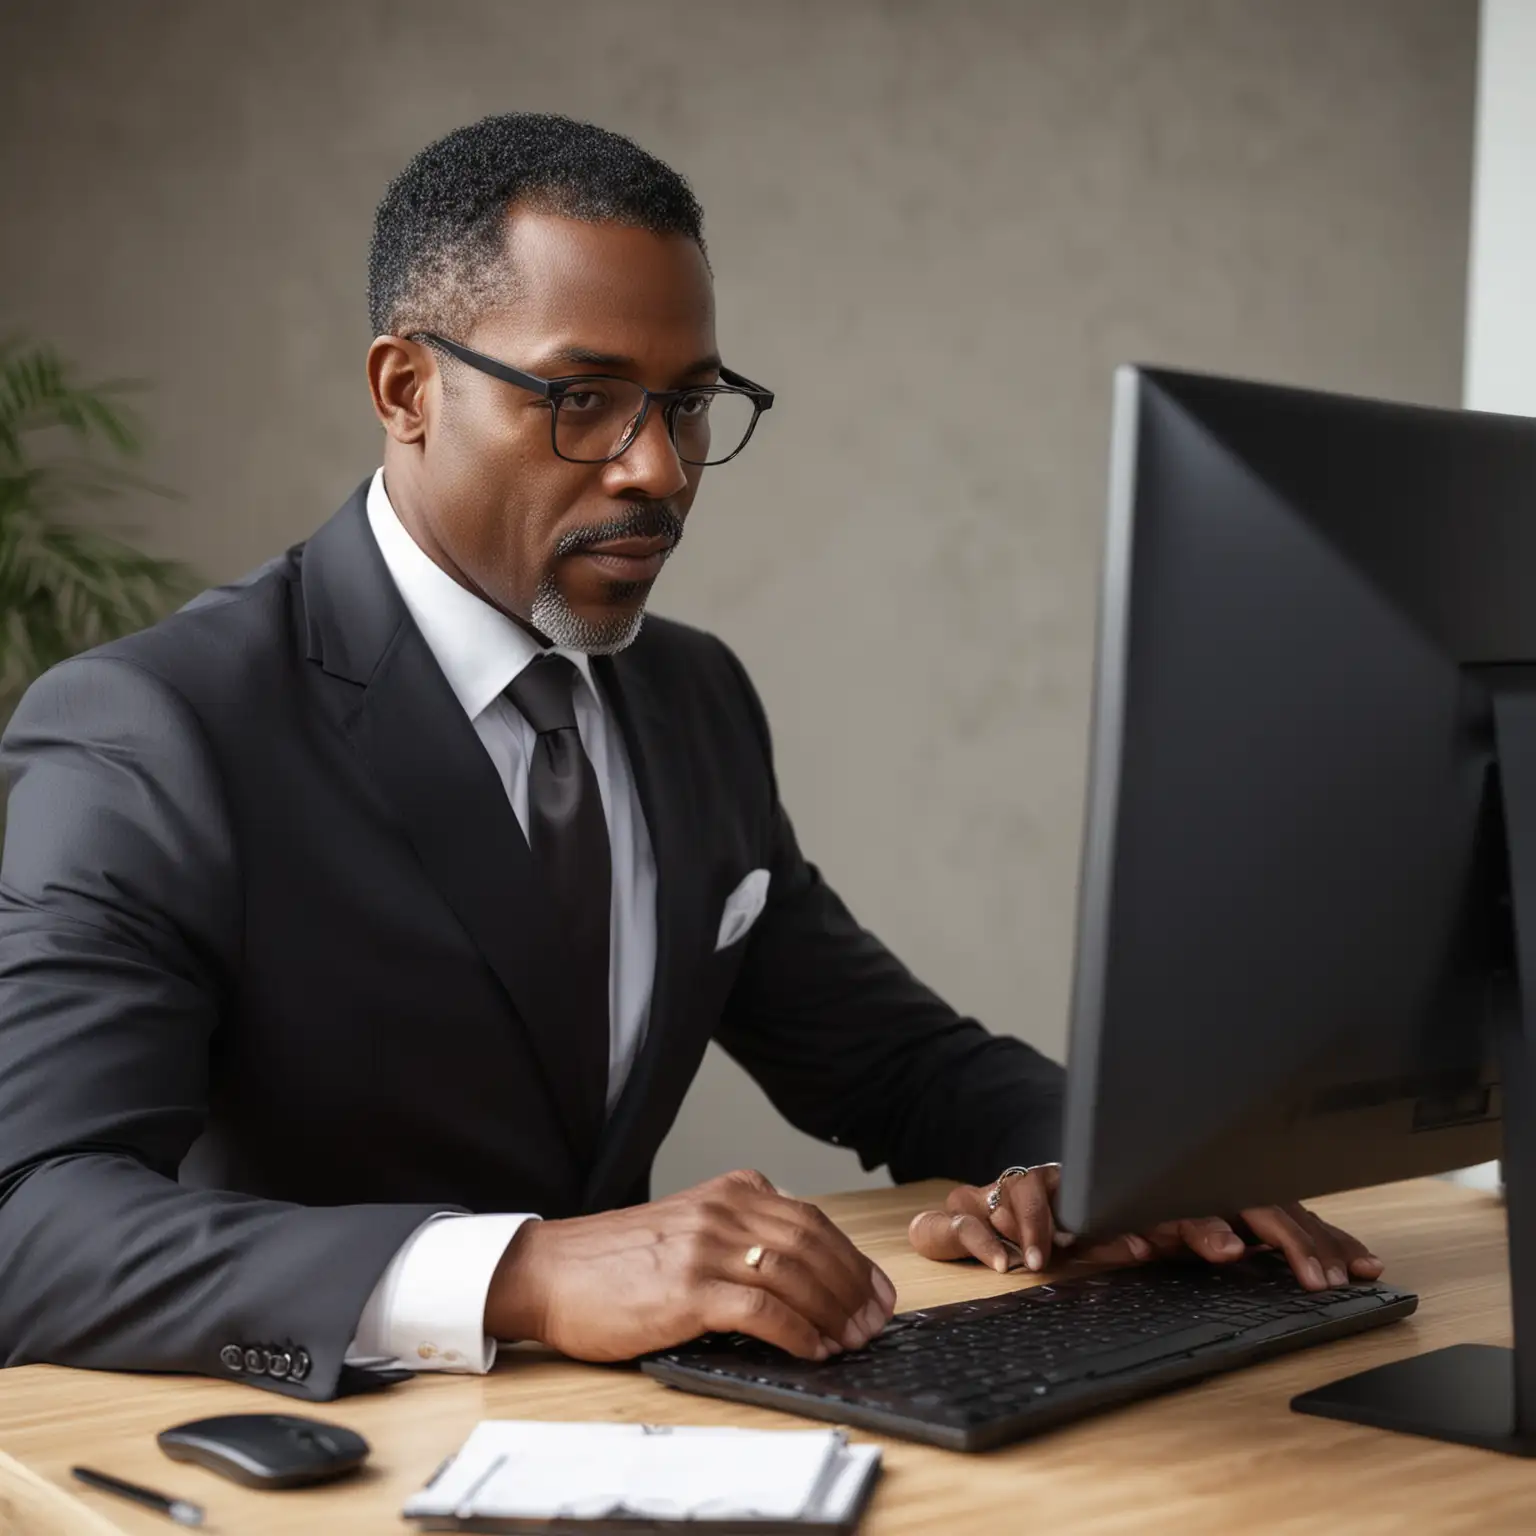 Professional Black Male Working on Website in Business Attire